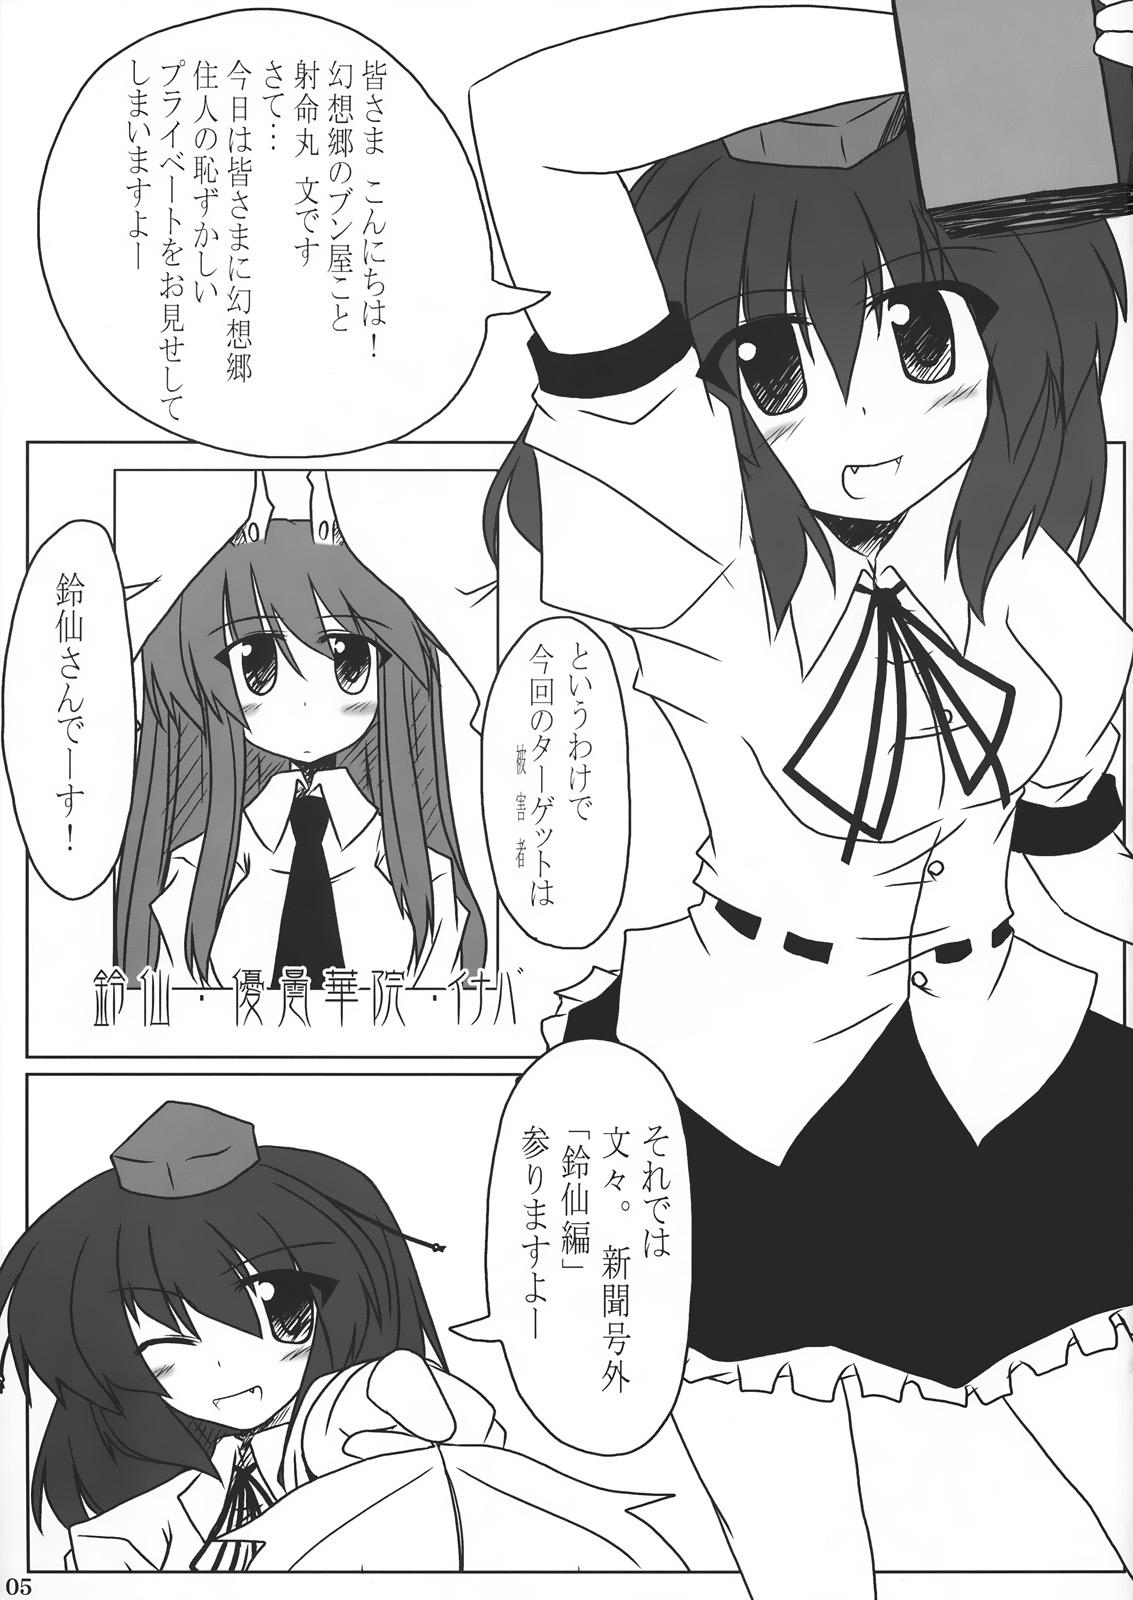 Chicks Touhou Gensoukyou - Touhou project Clothed - Page 4